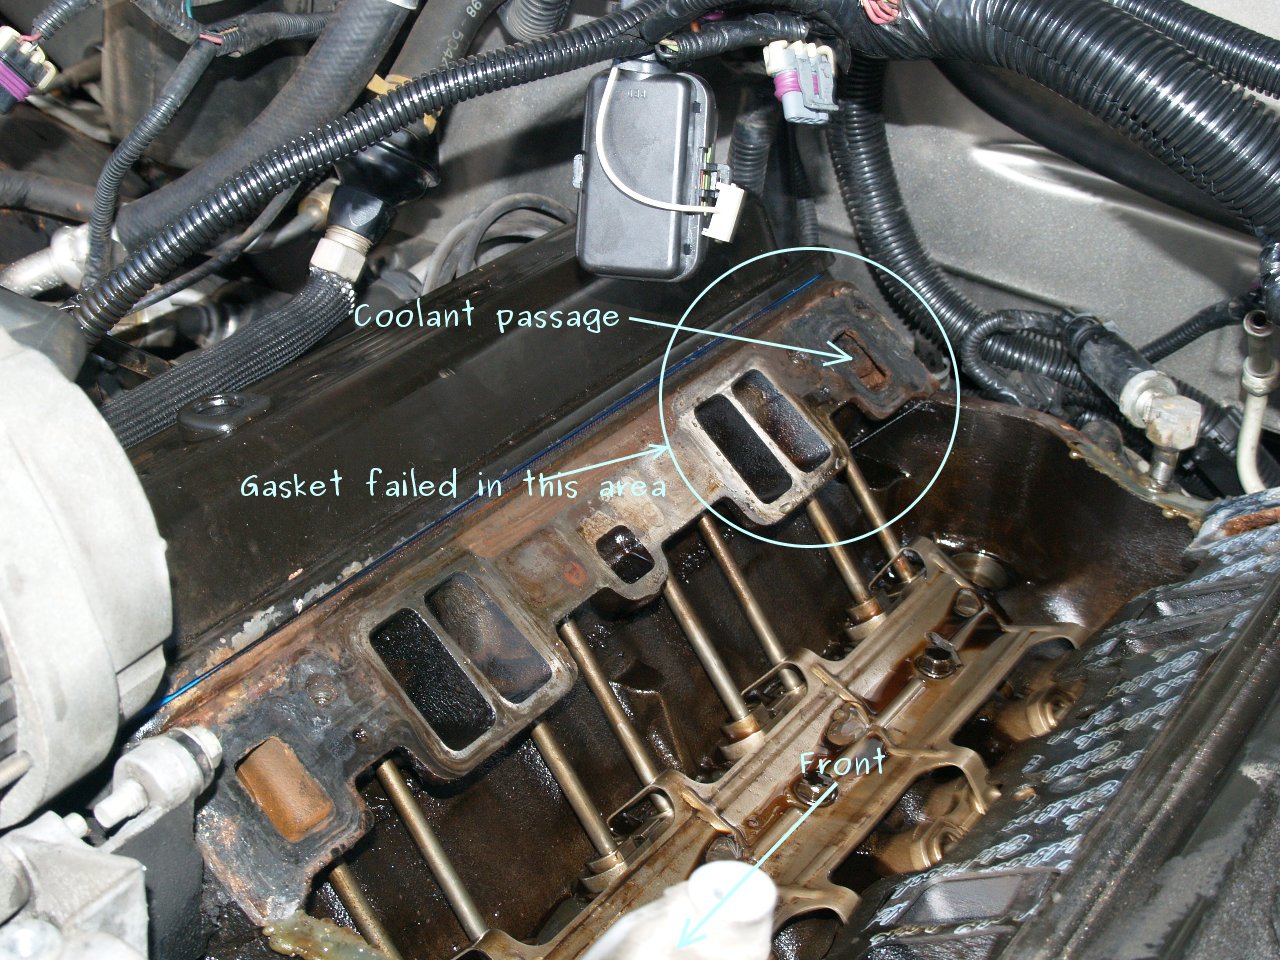 See P0126 in engine